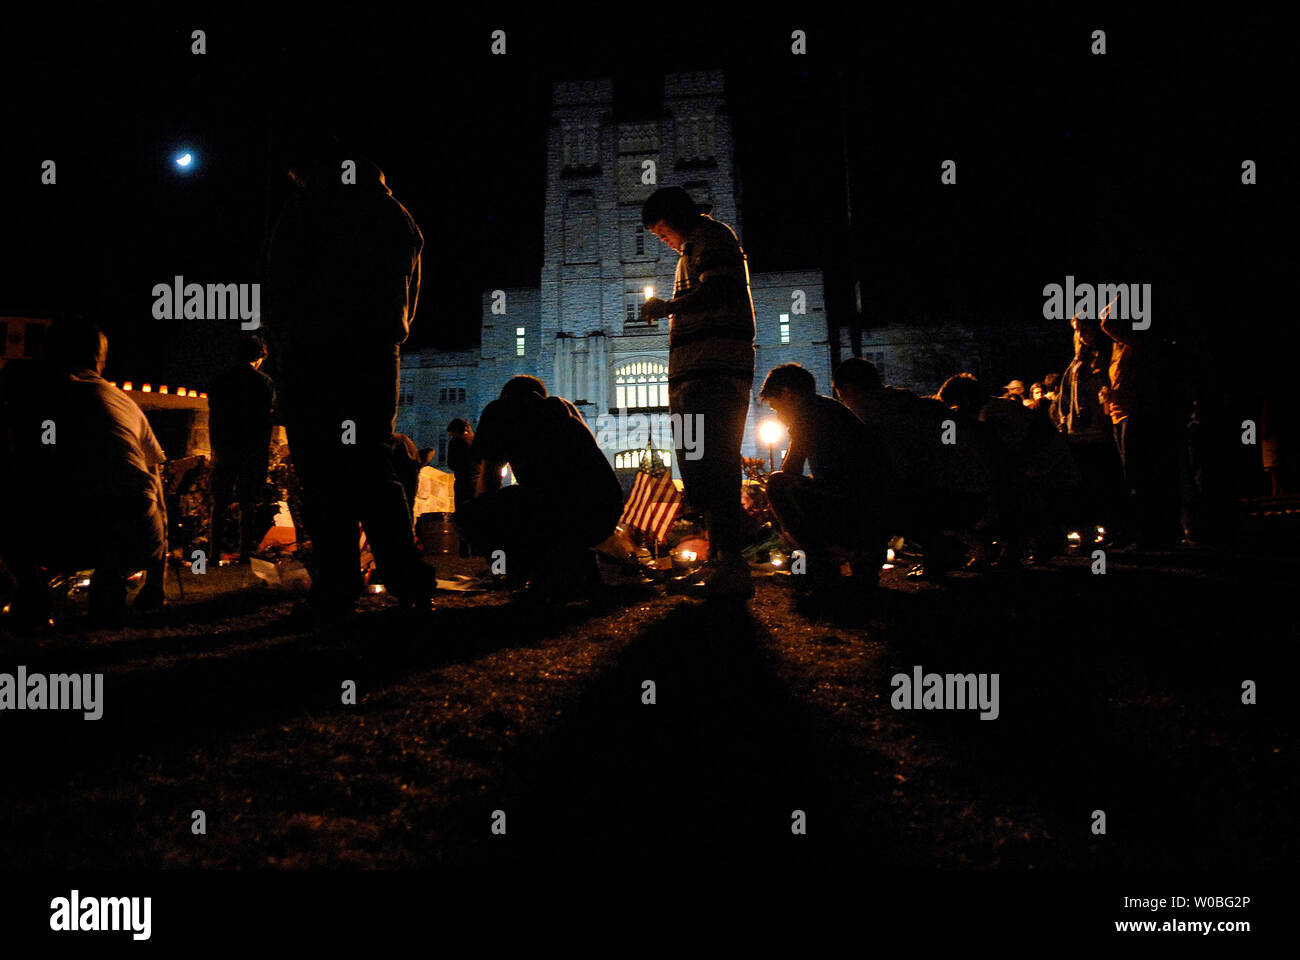 Visitors pay their respects to the 32 victims of last Mondays shooting at a memorial in front of Burruss Hall, on the campus of Virginia Tech in Blacksburg, Virginia on April 22, 2007. Cho Seung-Hui, a student at Virginia Tech, went on a shooting spree and killed 32 people on April 16, 2007. It was the deadliest school shooting in U.S. history. (UPI Photo/Kevin Dietsch) Stock Photo